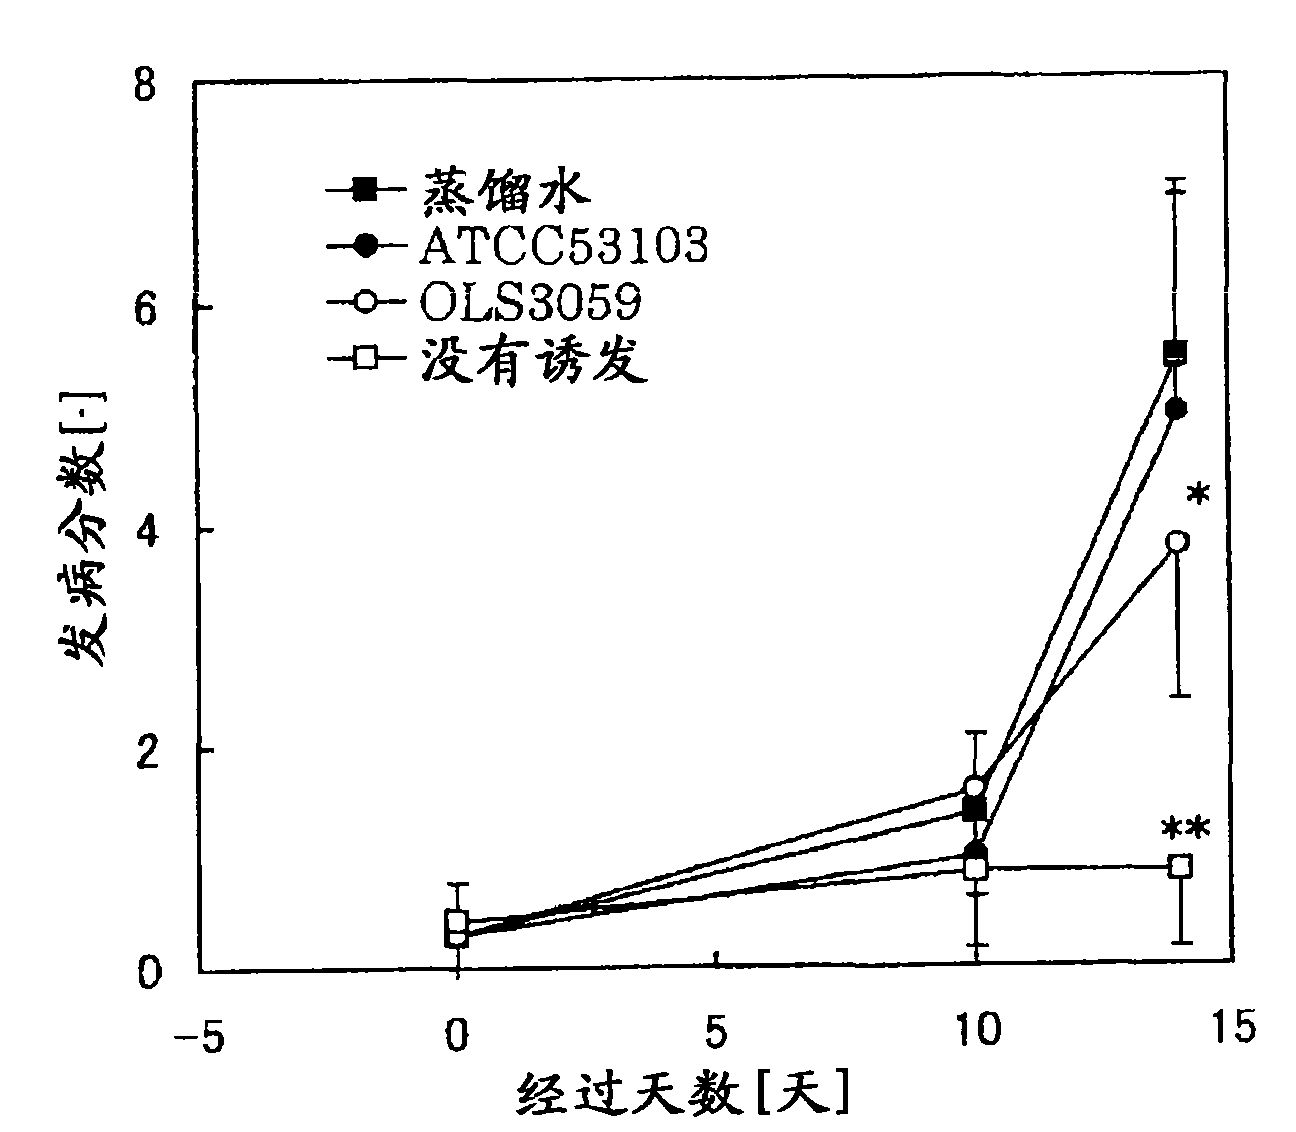 Fermented milk for improving and/or treating skin and method for producing the same